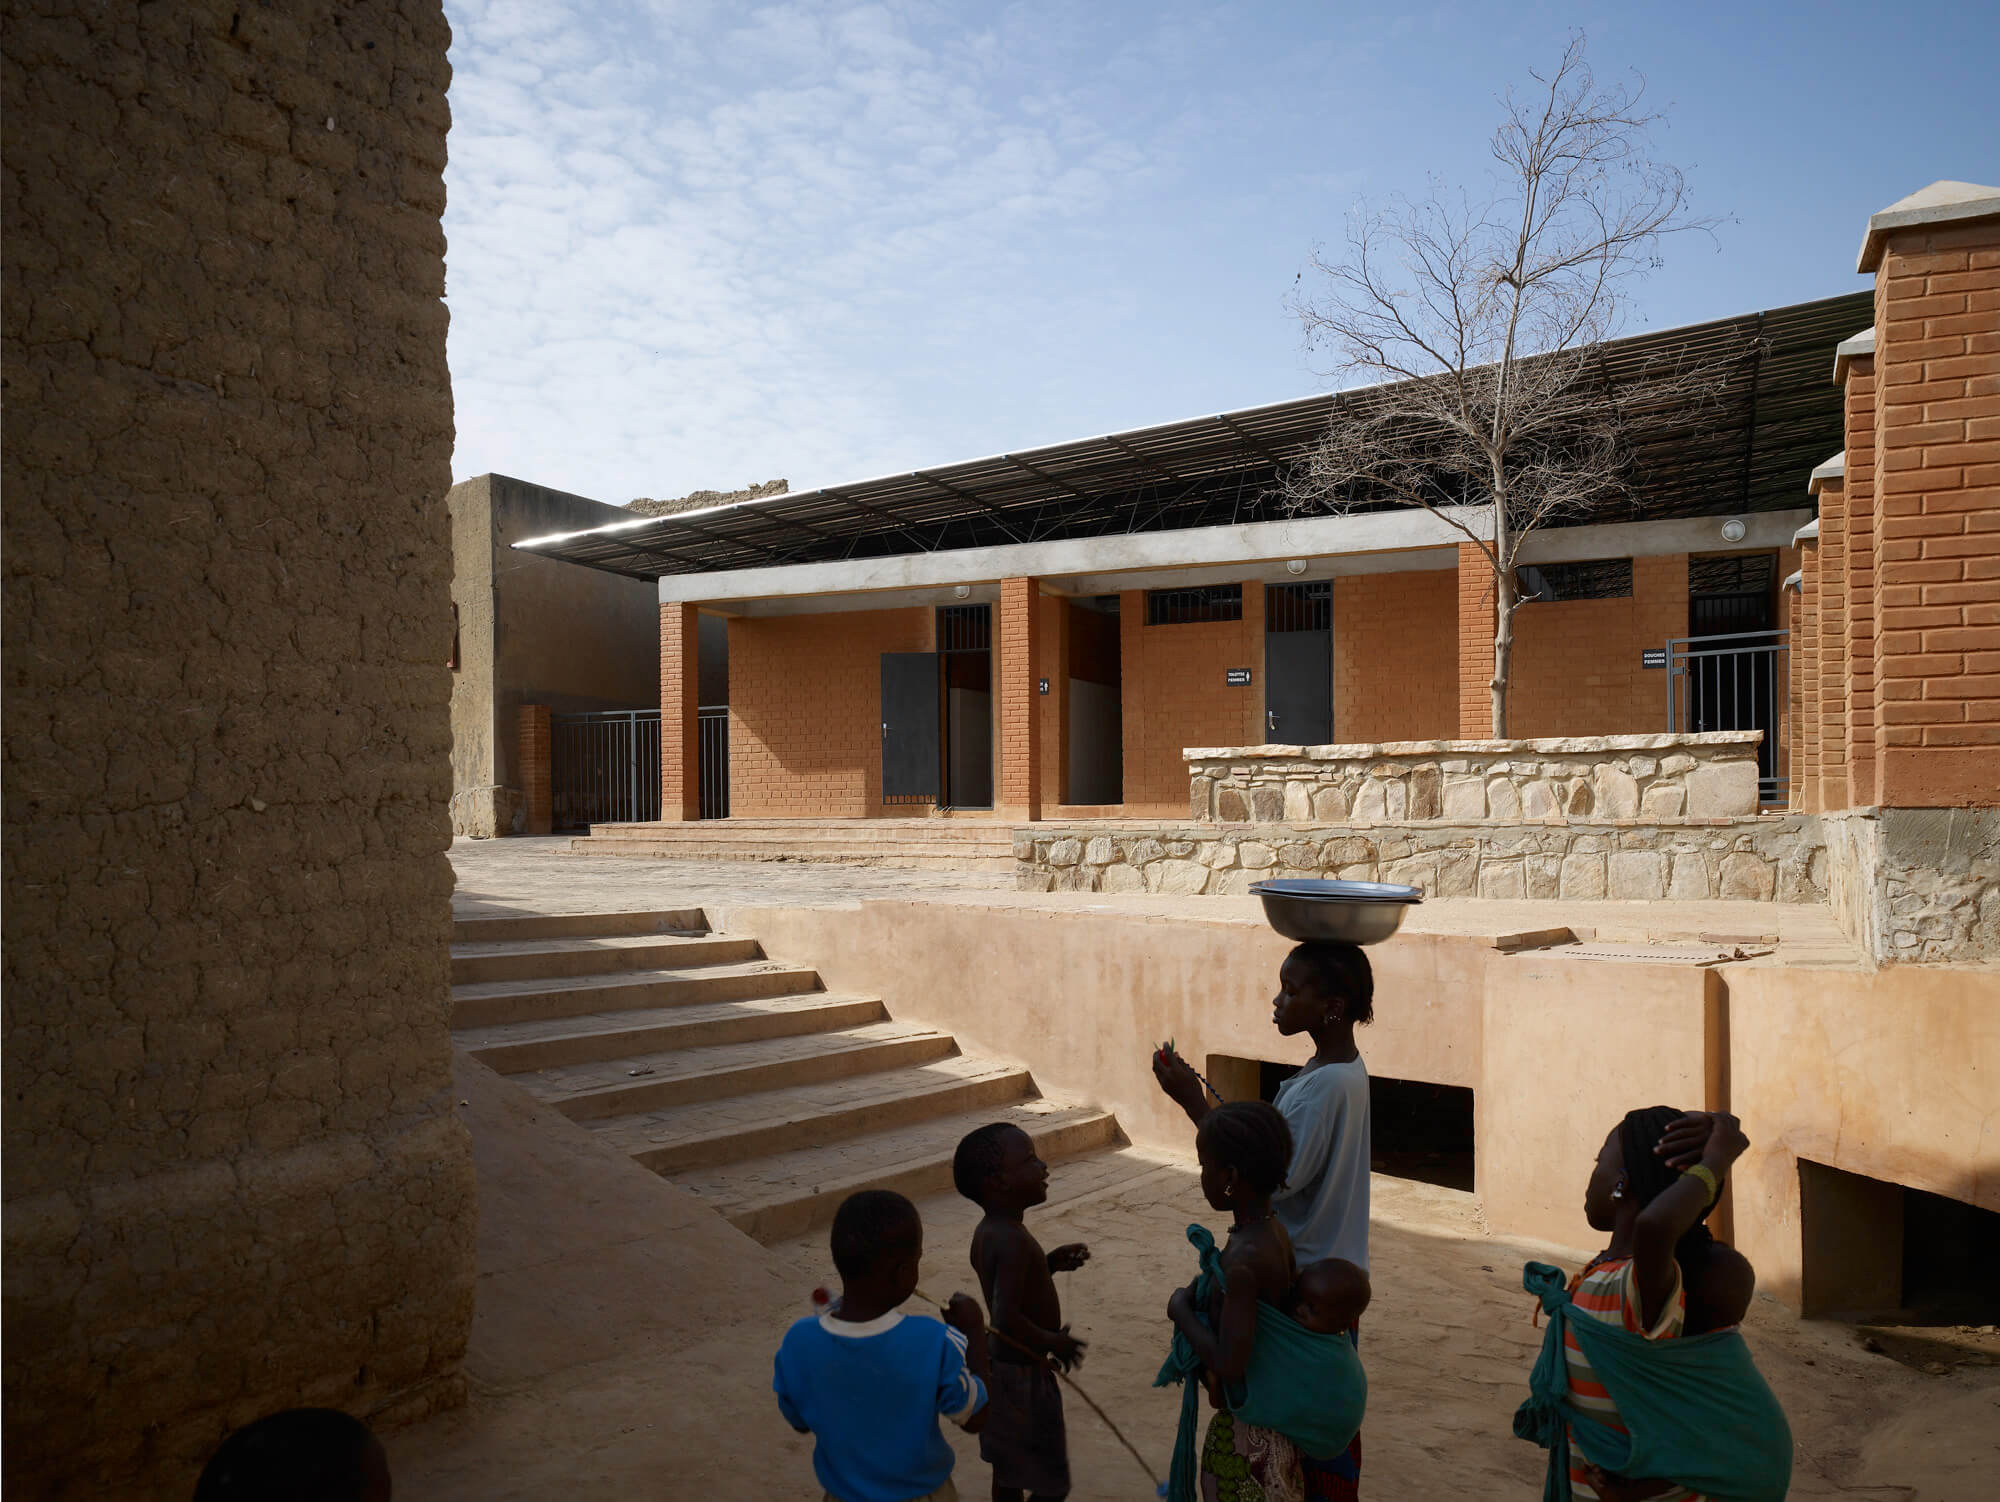 people gather in a shaded courtyard outside an earthen building